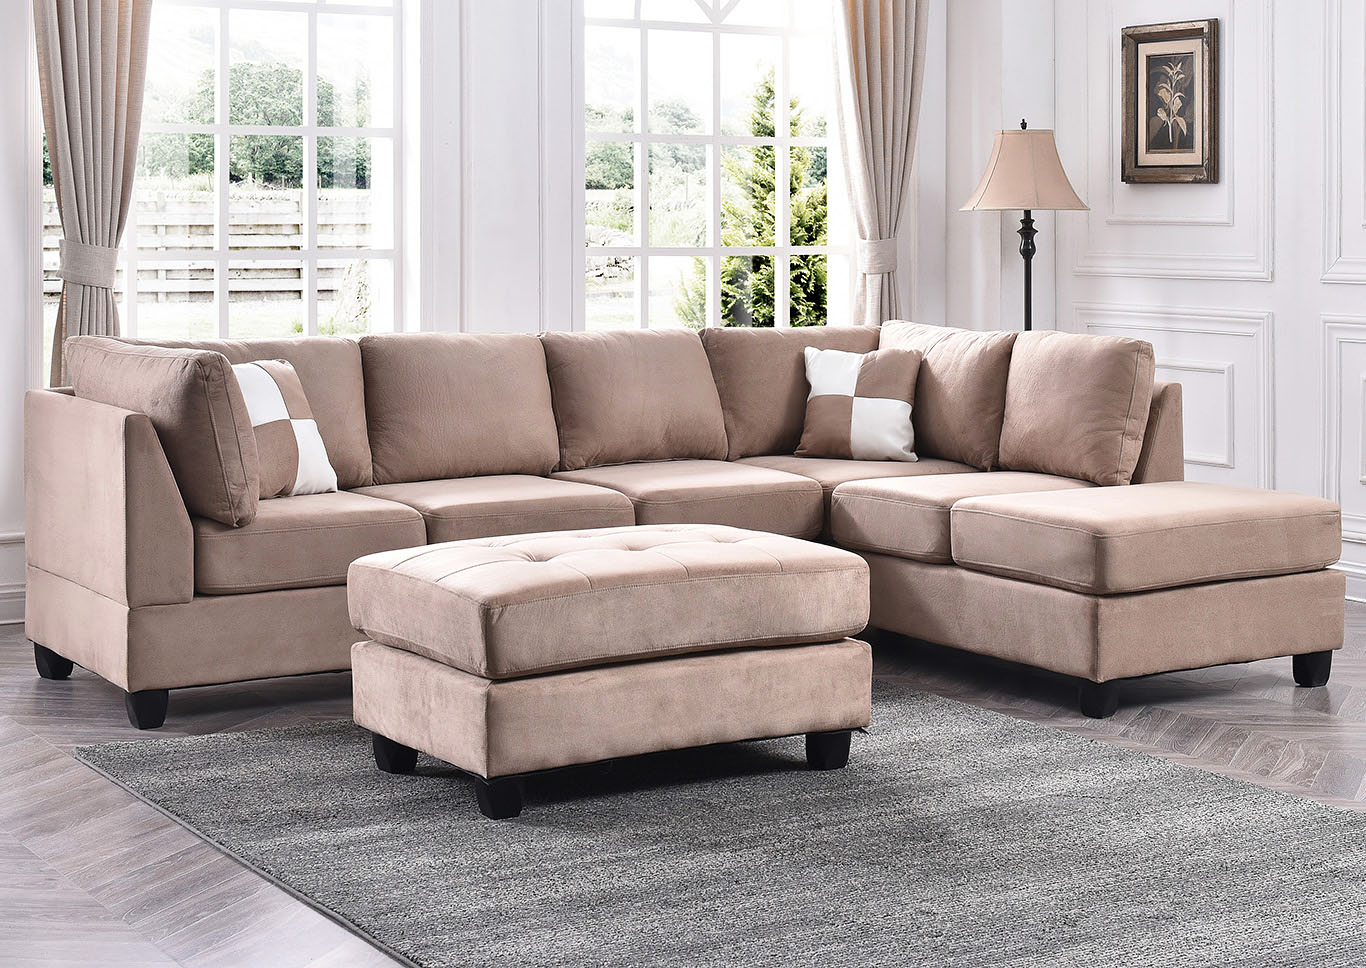 Mocha Suede Sectional,Glory Furniture